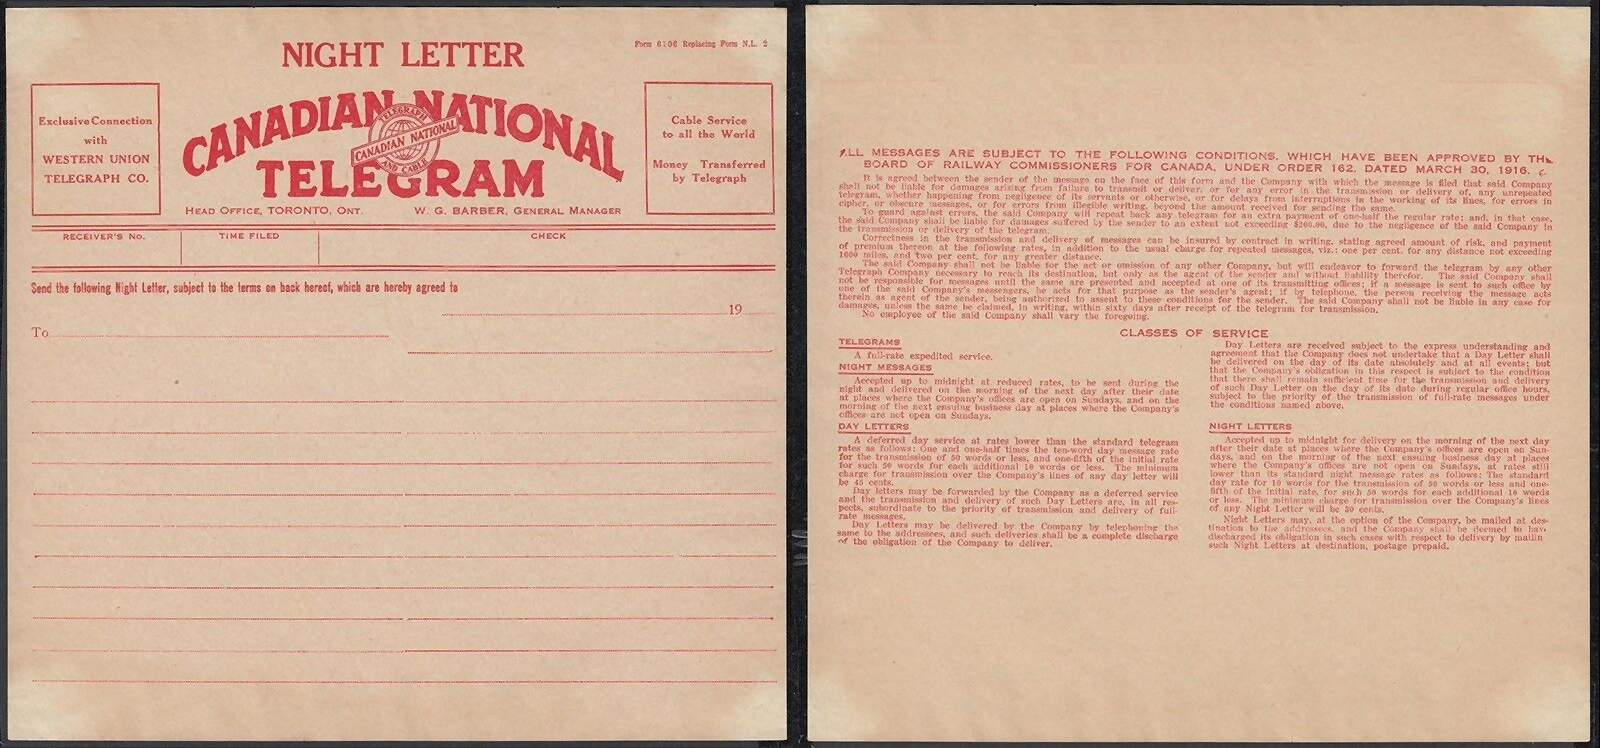 Night Letter form of 1916+